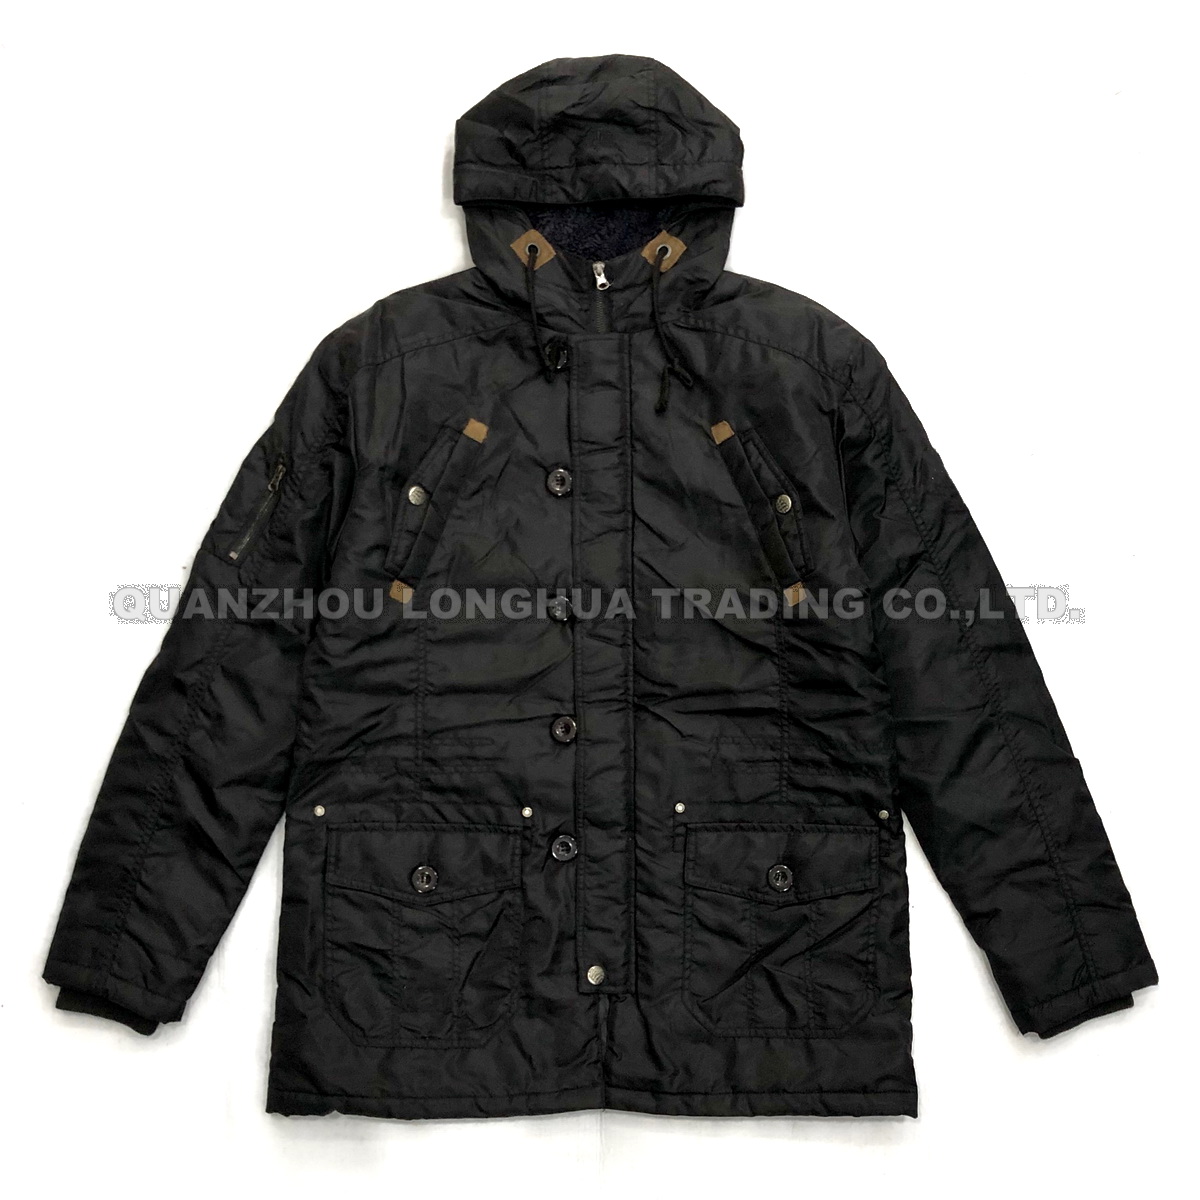 Men Jacket Boy Apparel Polyester Quilted Hoody Jacket Fashion Clothes Winter Coat Outdoor Clothing with Zipper Buttons